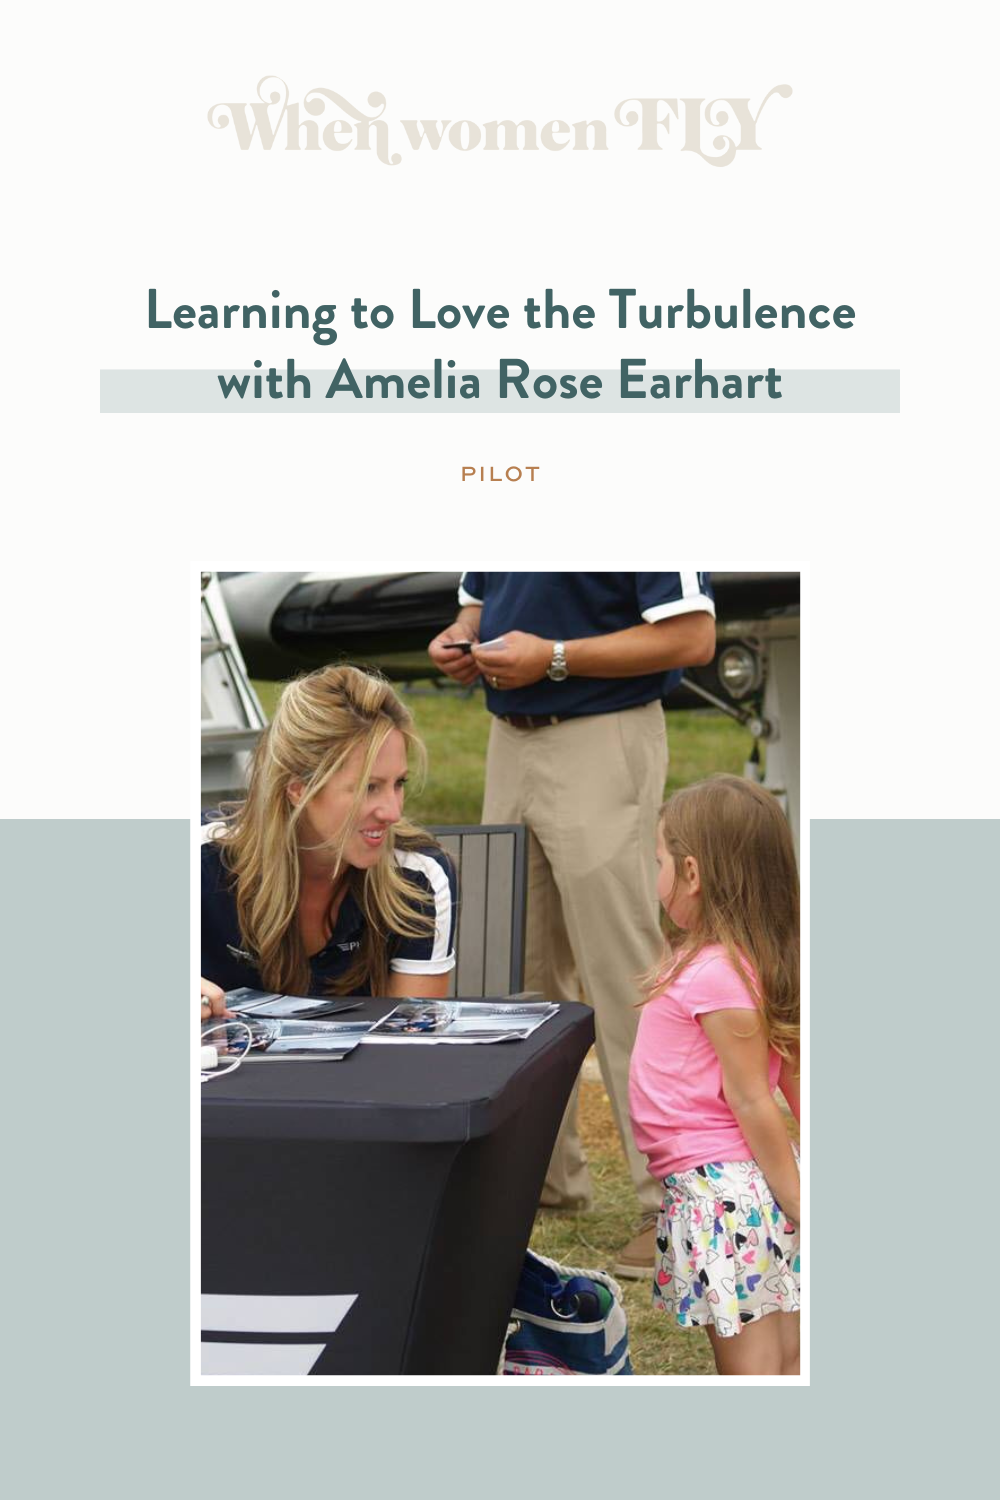 Learning to Love the Turbulence with Amelia Rose Earhart via When Women Fly podcast